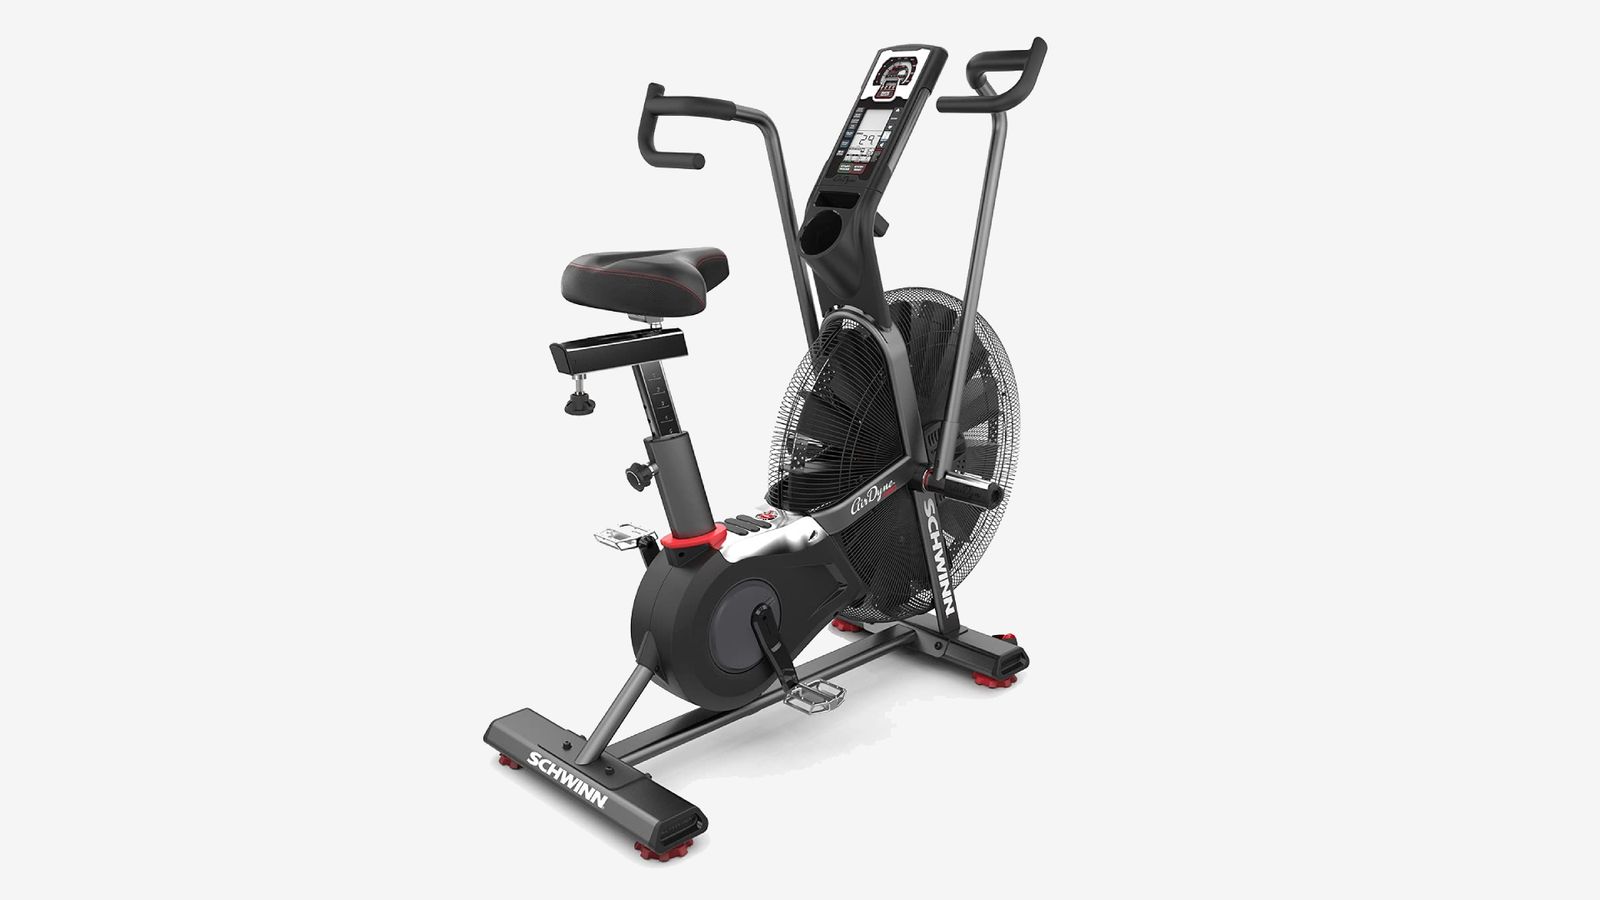 Schwinn Fitness AD7 Airdyne product image of a black framed bike with red details.